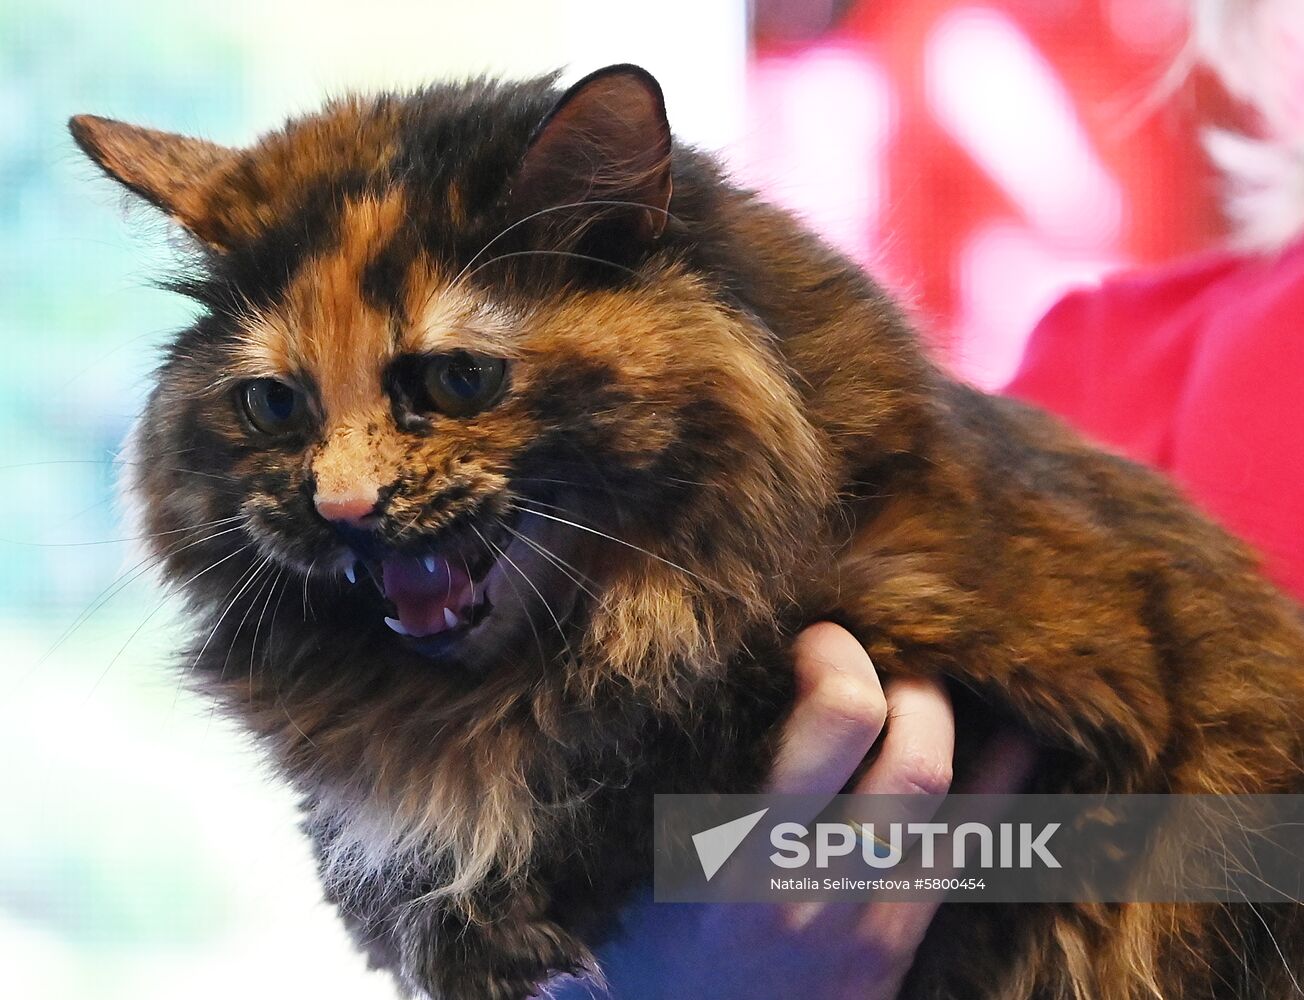 Russia Cats Show